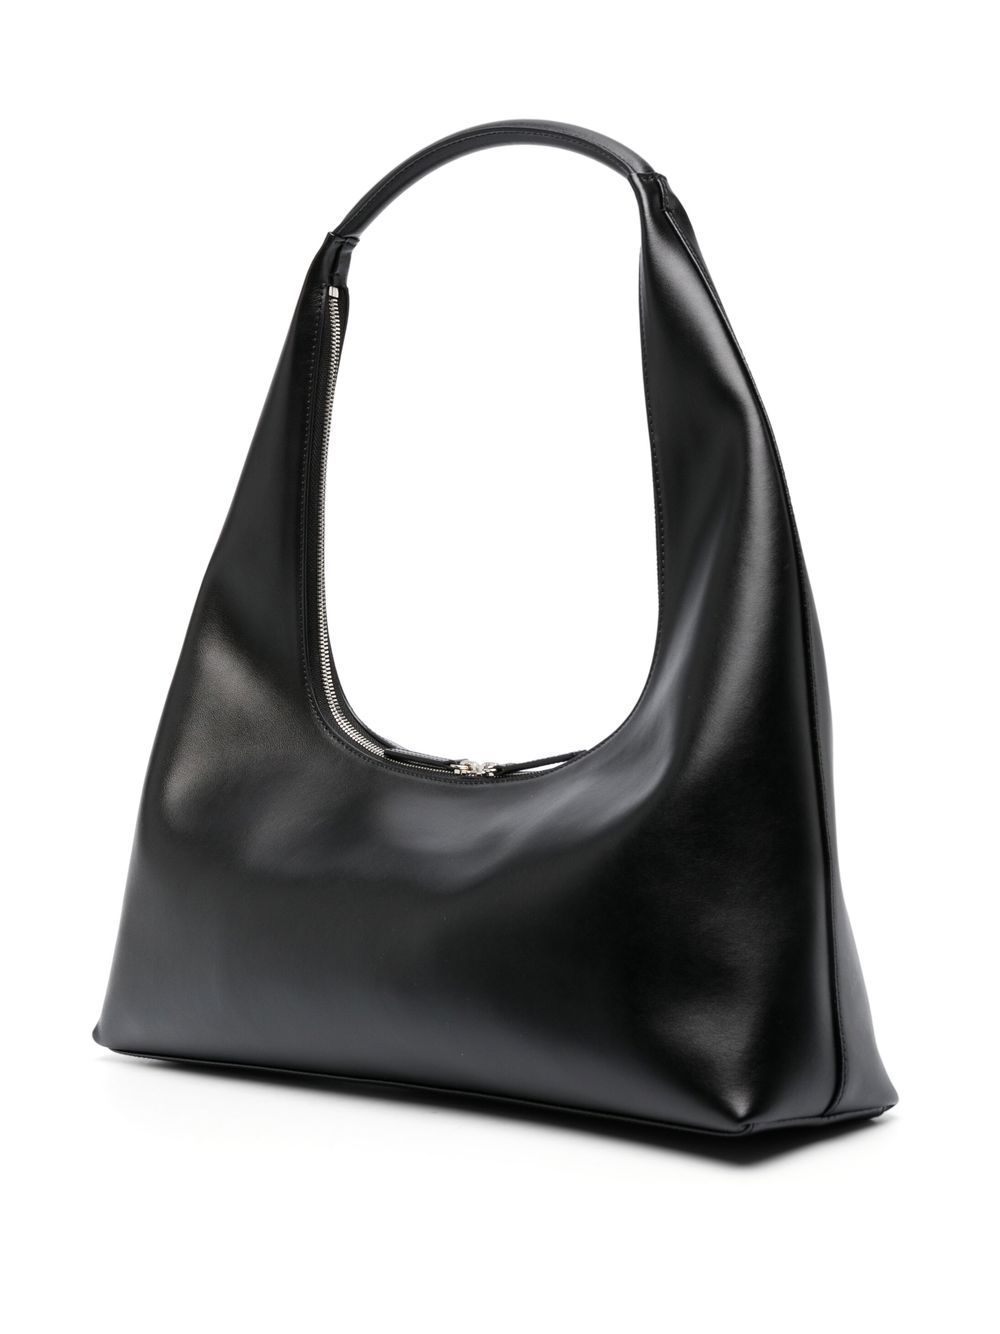 Marge Sherwood Tote Bags for Women on Sale - FARFETCH